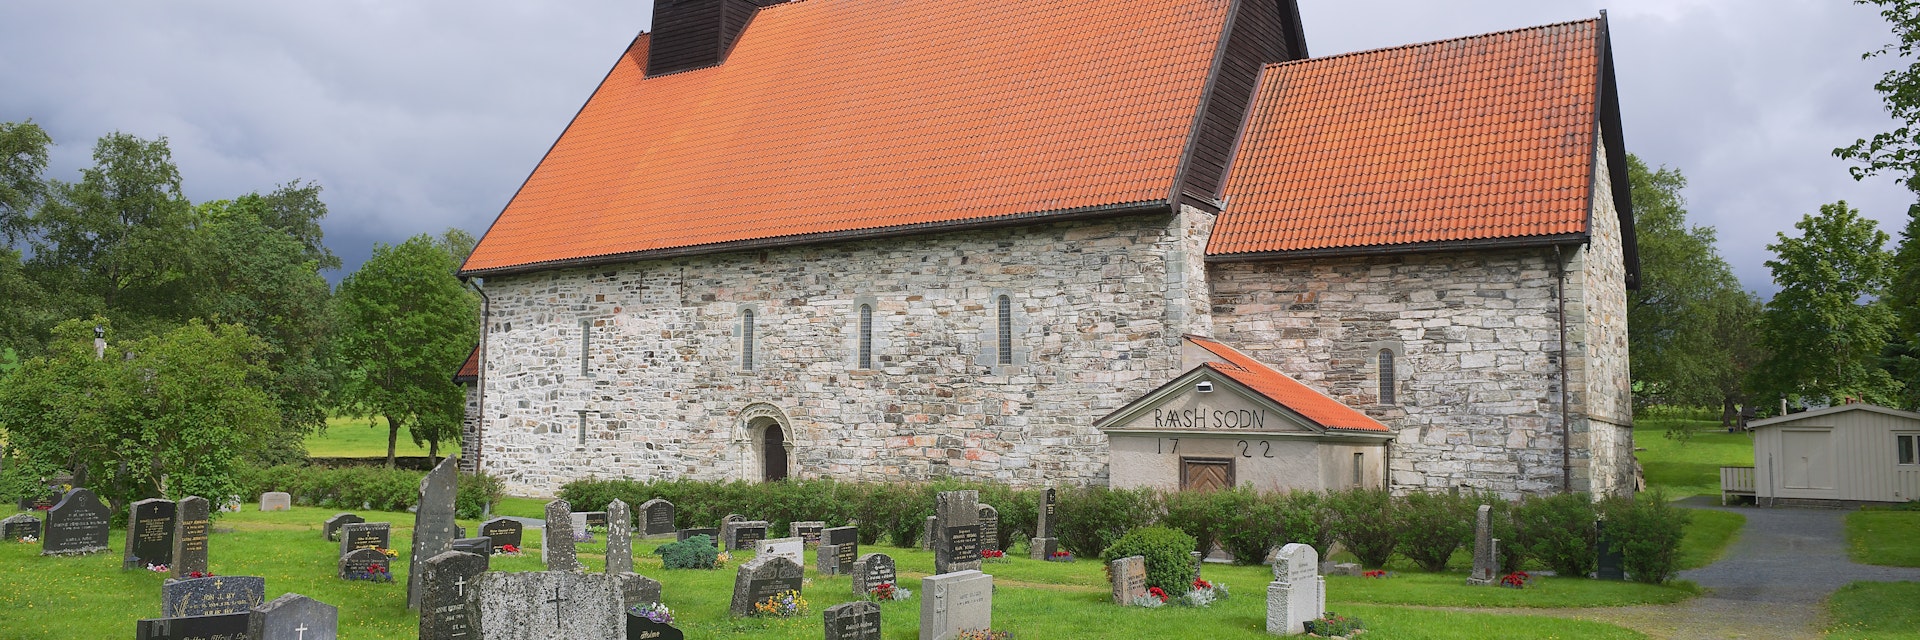 Stiklestad church and cemetery in Stiklestad, Norway.